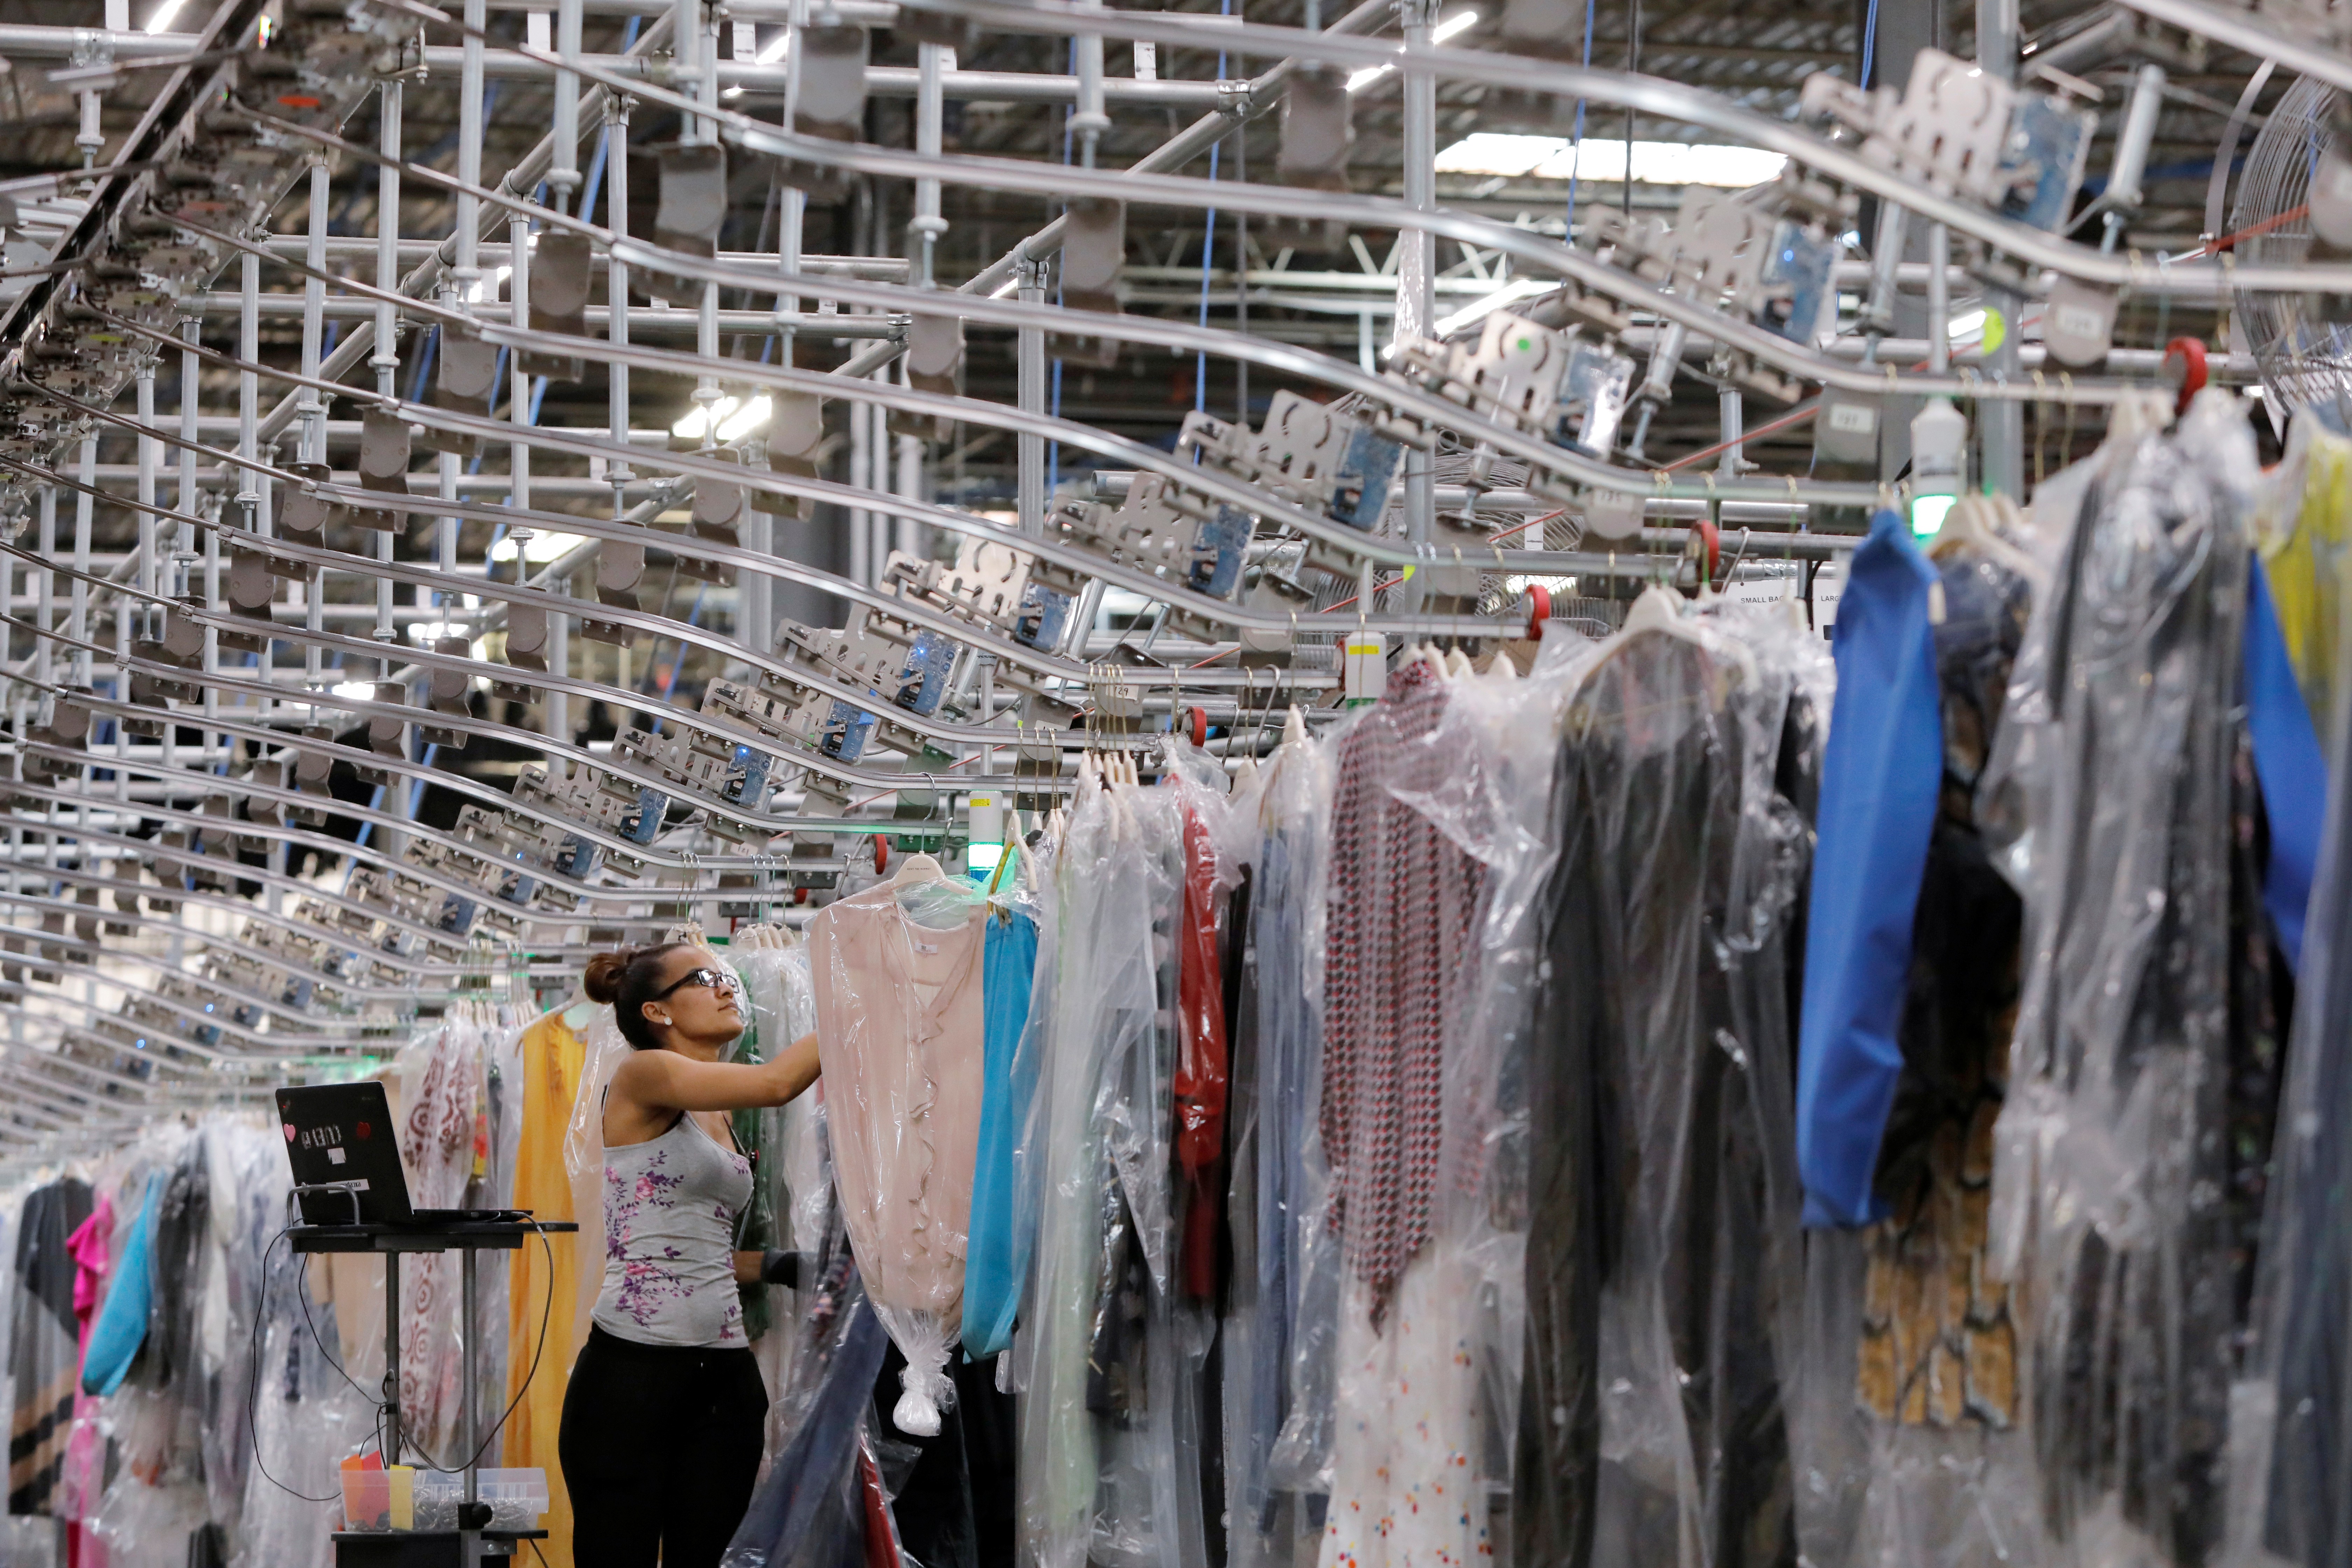 Rent The Runway (Foto: Andrew Kelly/Reuters)